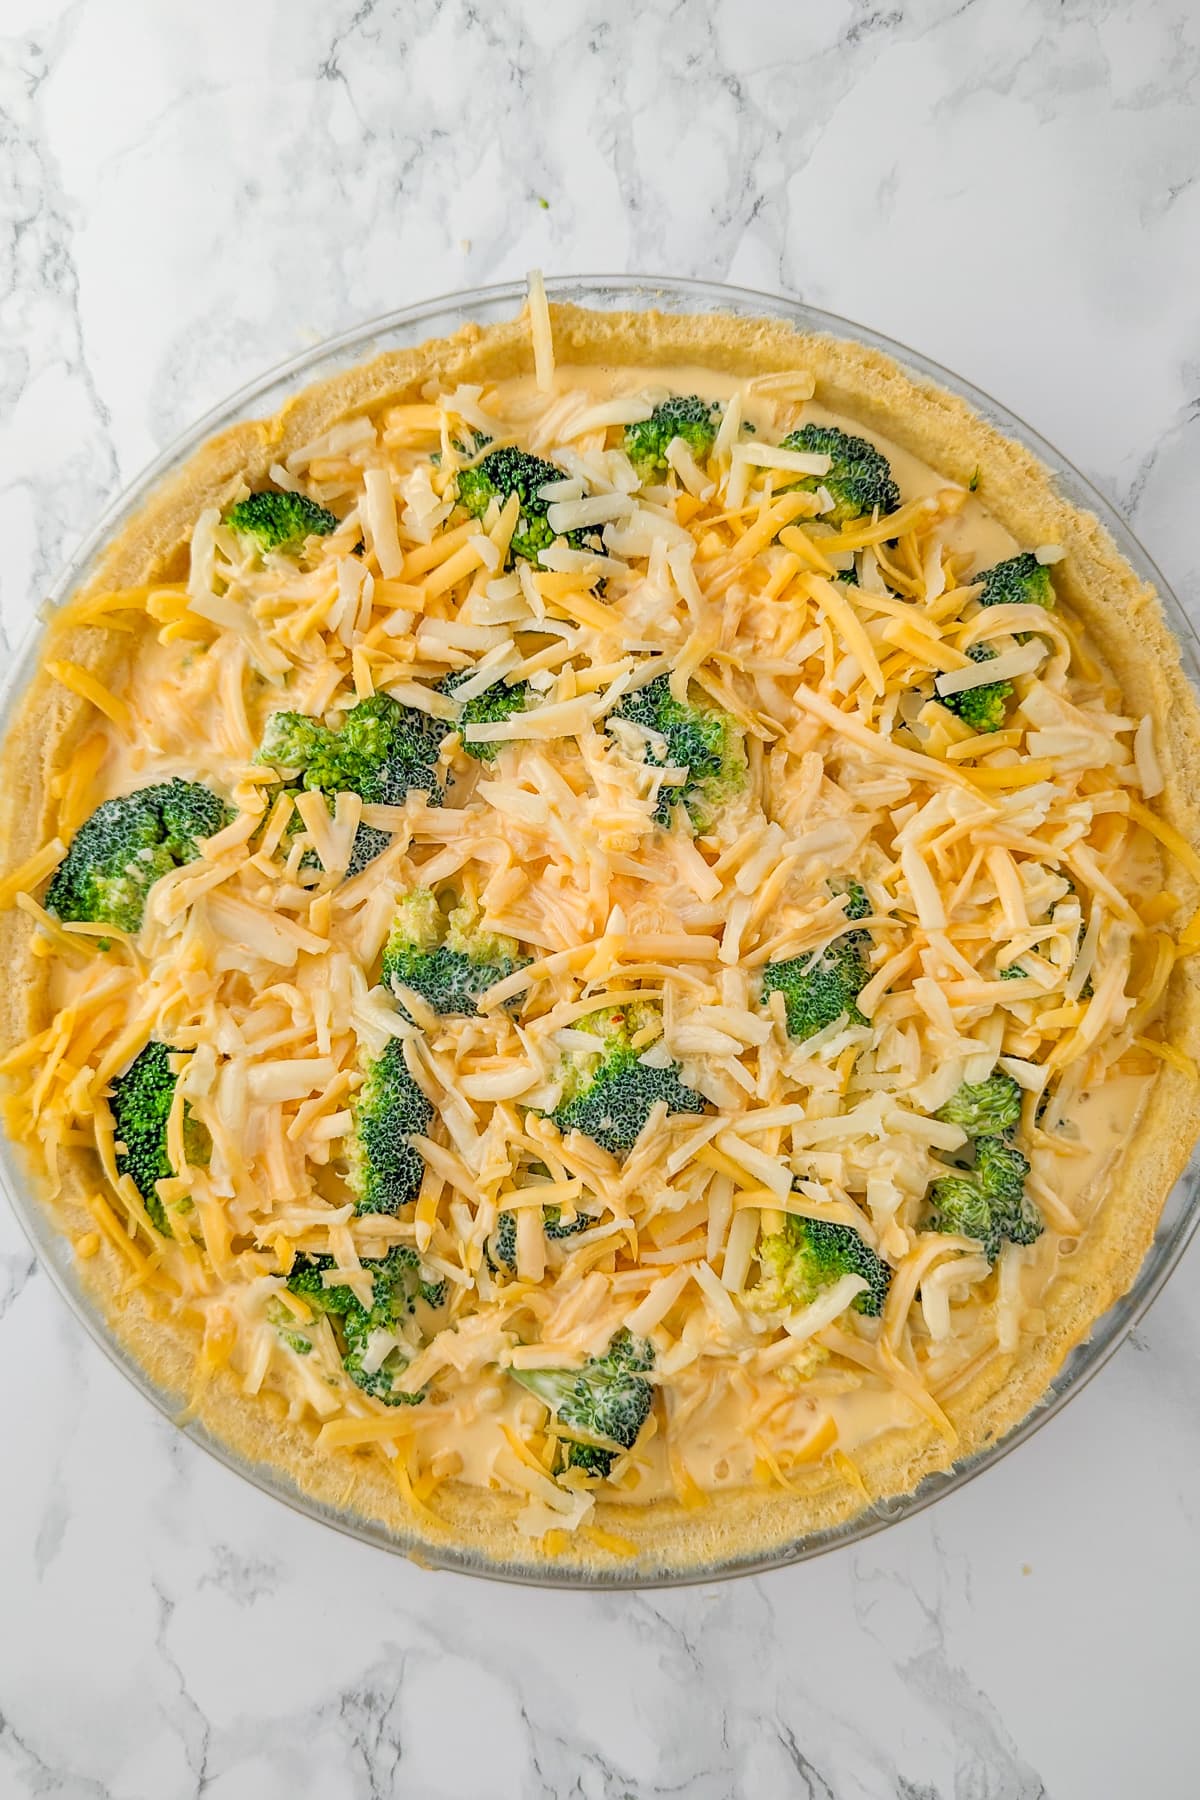 A quiche before baking, where the egg and cream mixture is poured over the broccoli and shredded cheese in the dough crust.